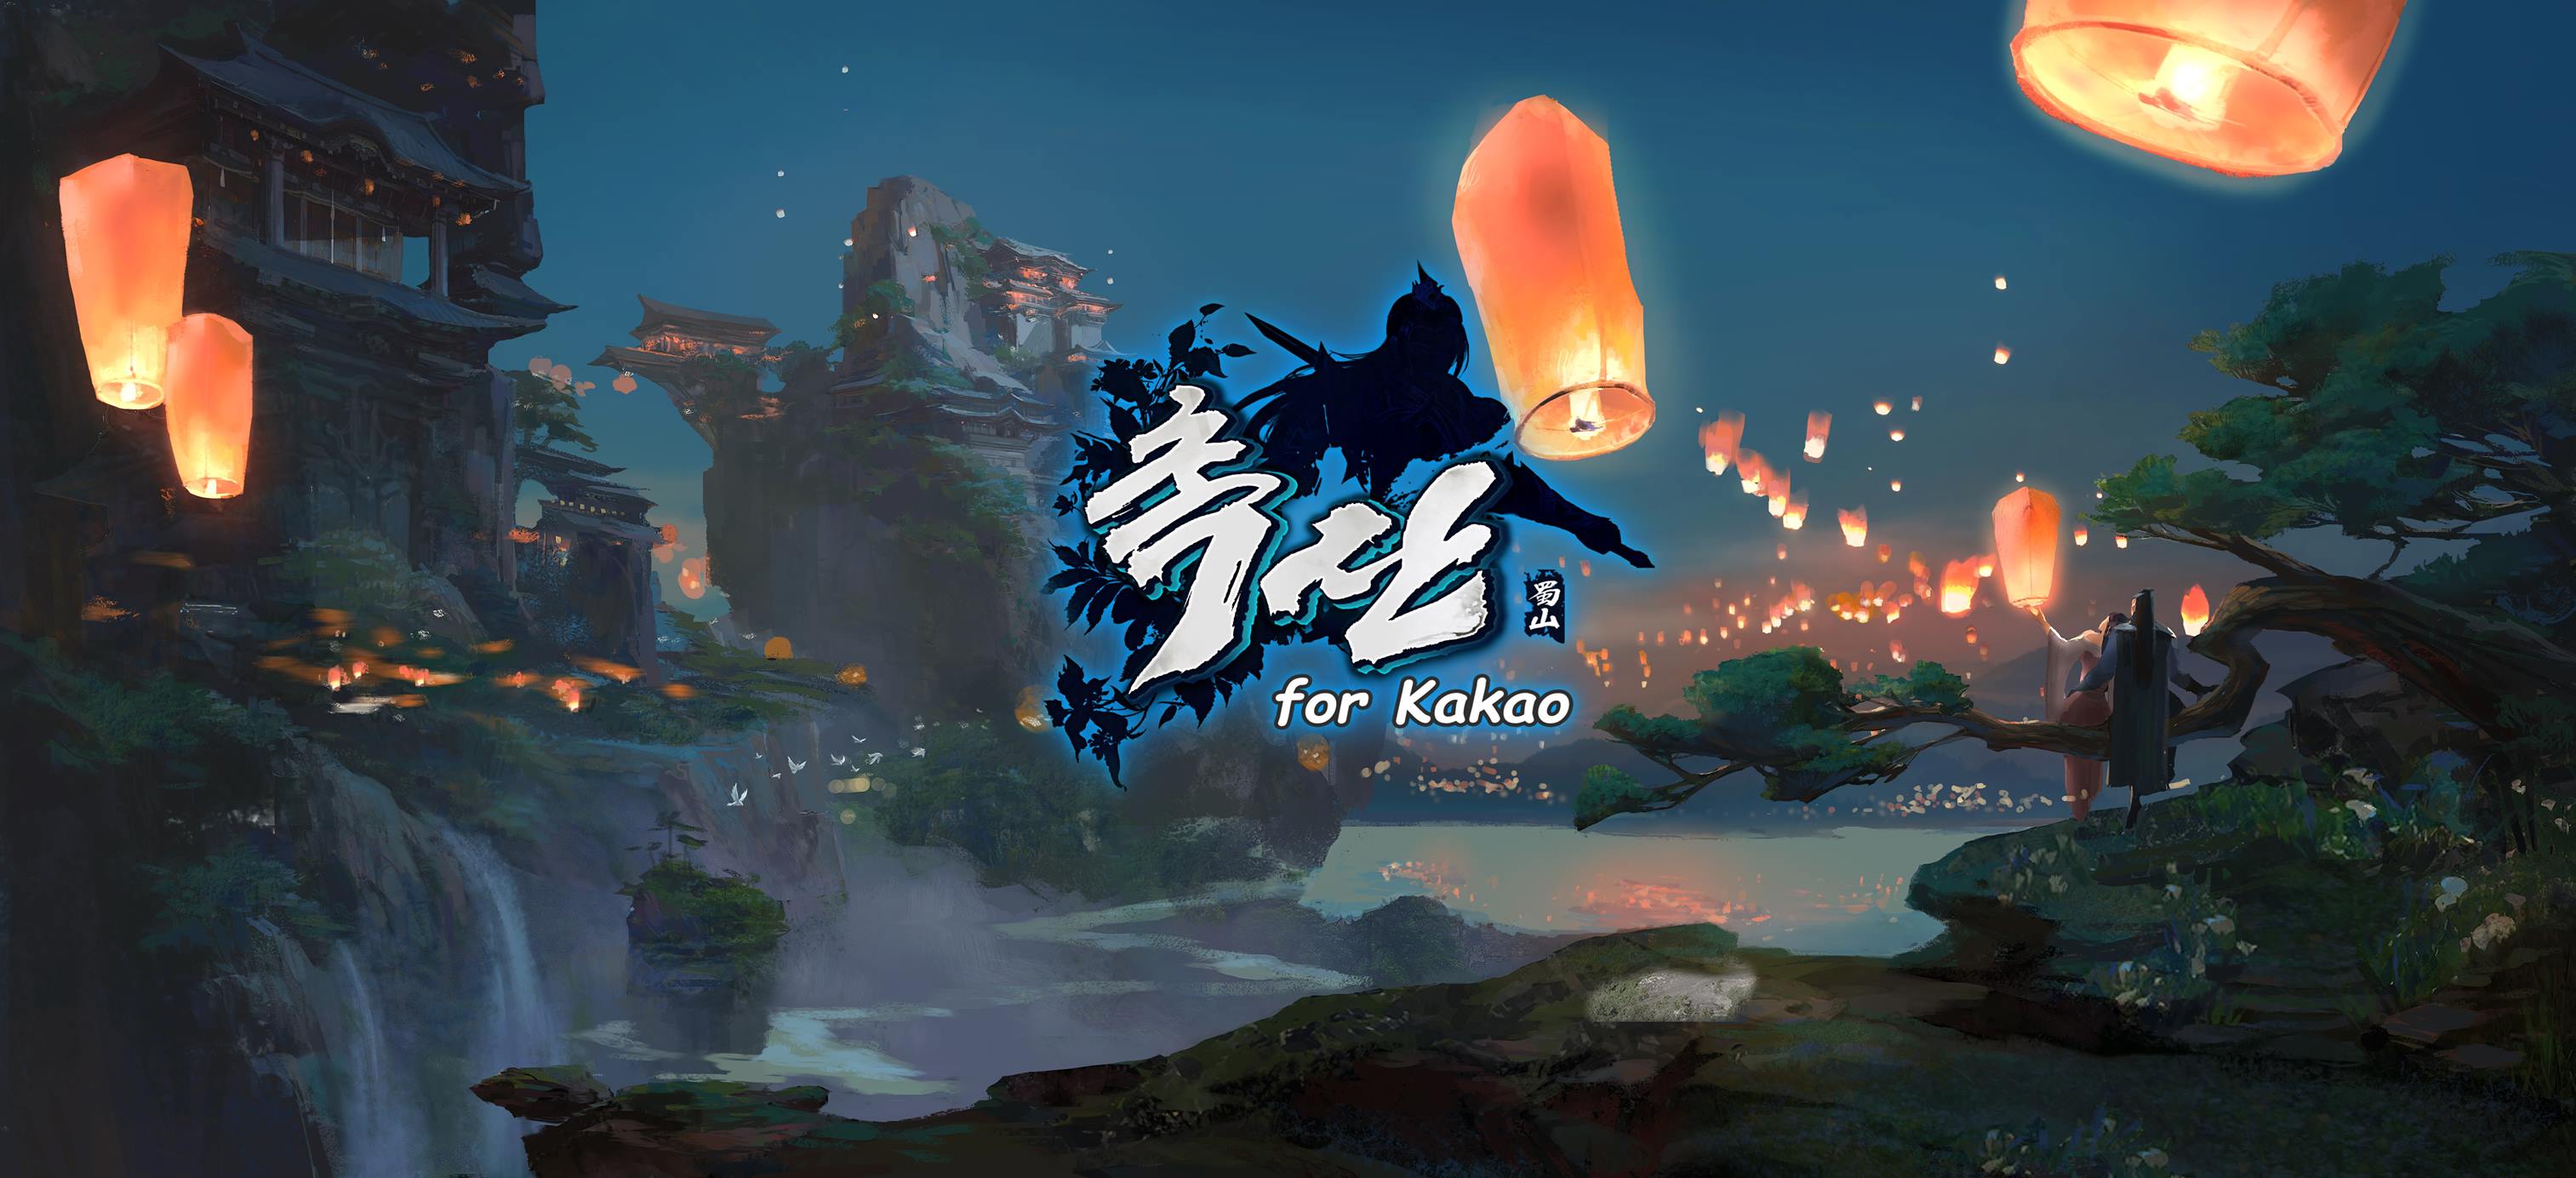 Video Game Chogsan for kakao HD Wallpaper | Background Image